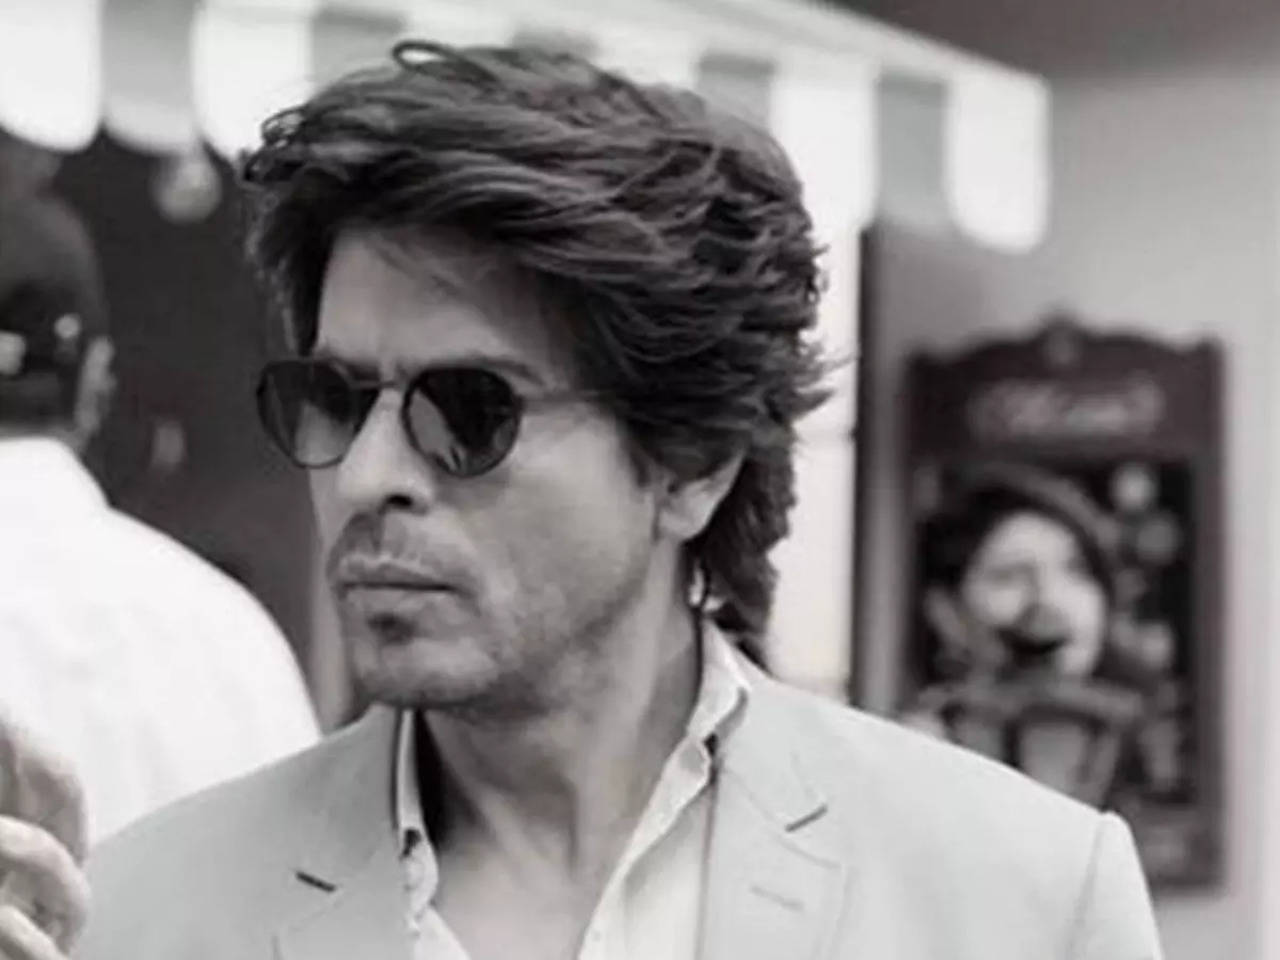 SRK 6 iconicdrool worthy hairstyles ponytail in Pathaan to Locks in Don